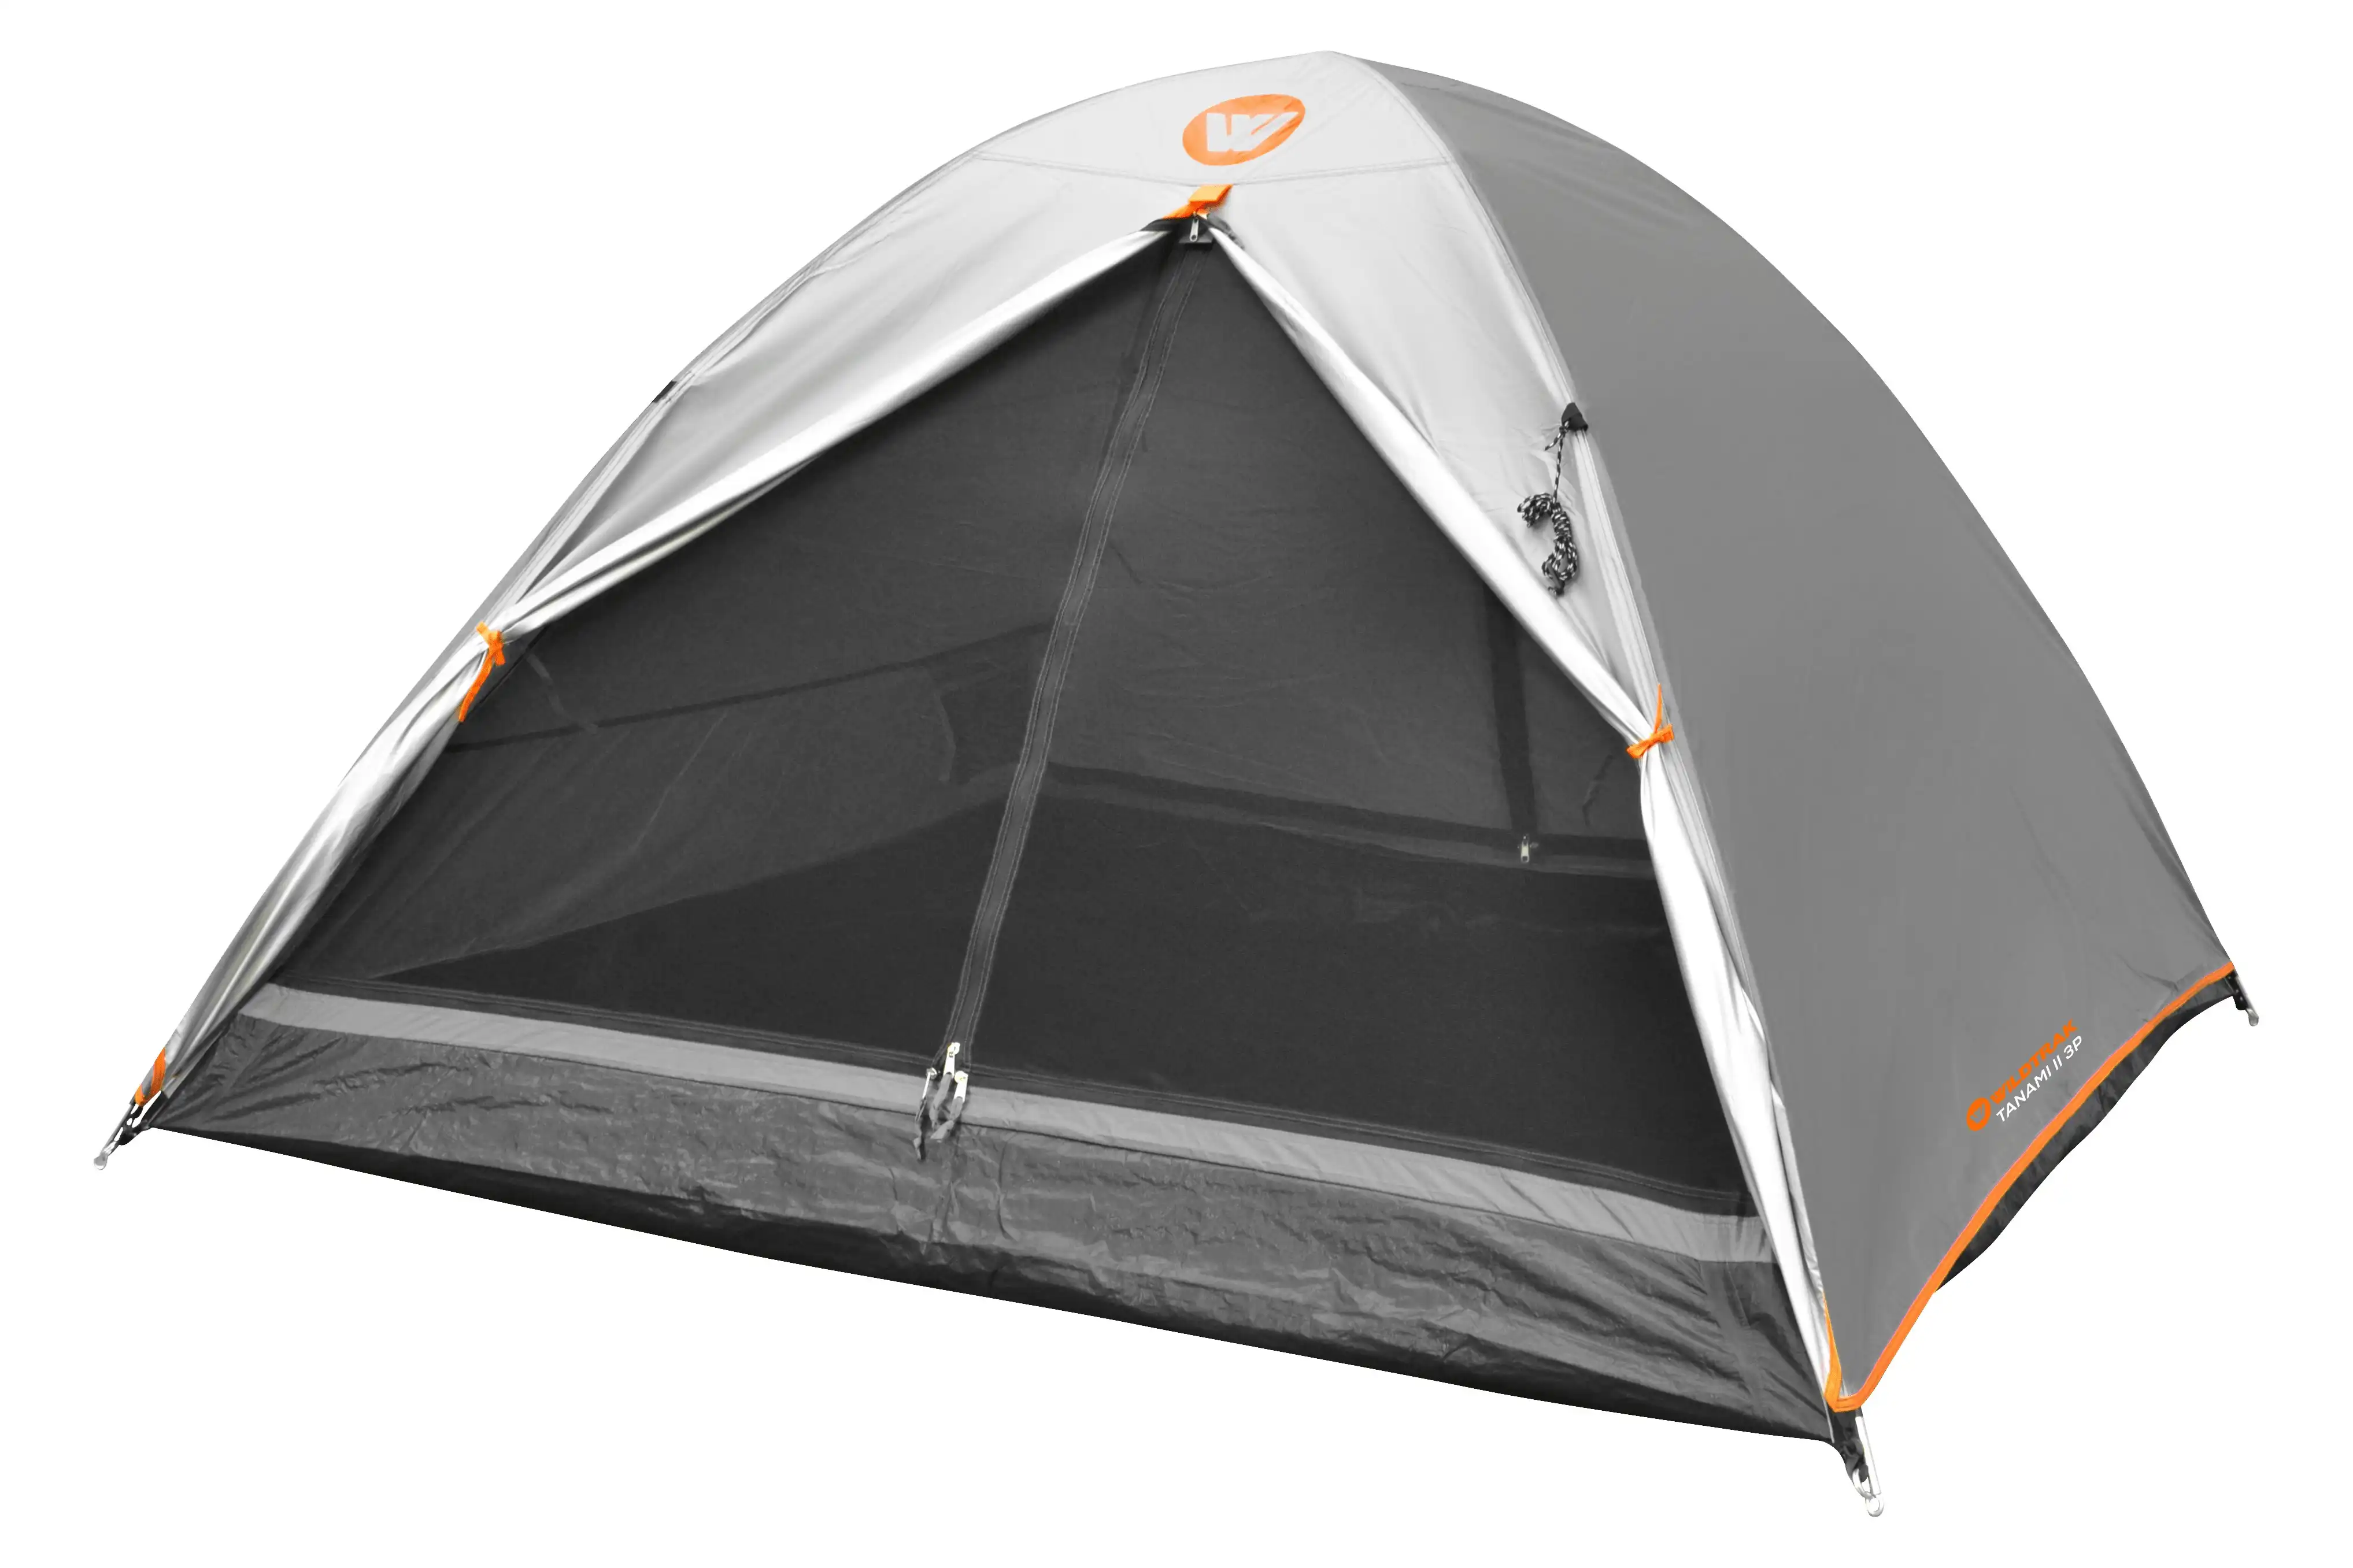 Tanami Series Ii 3 Person Dome Tent